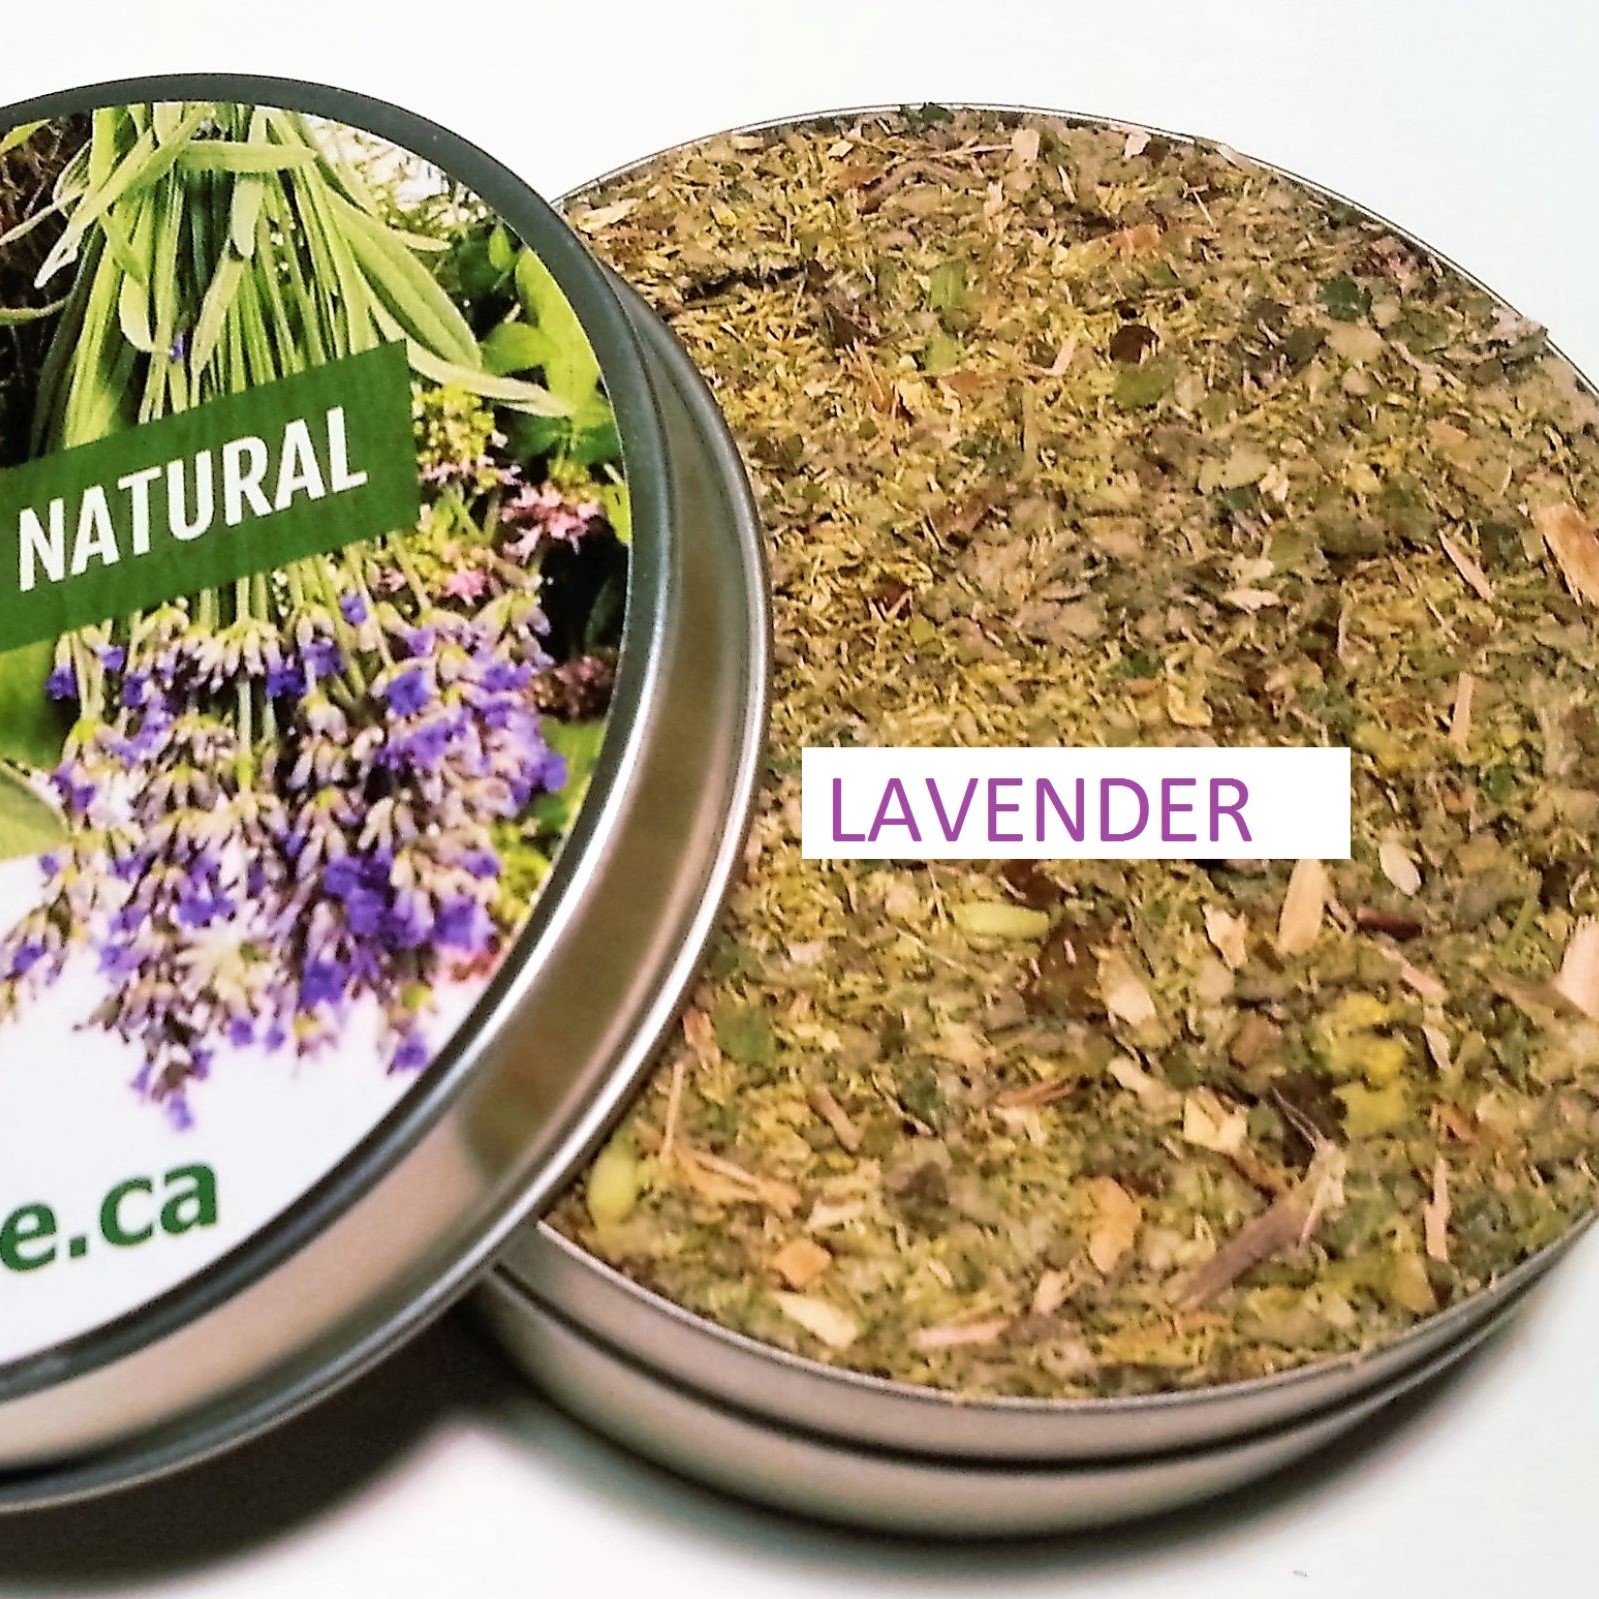 Effects of Smoking Lavender & Other Herbs